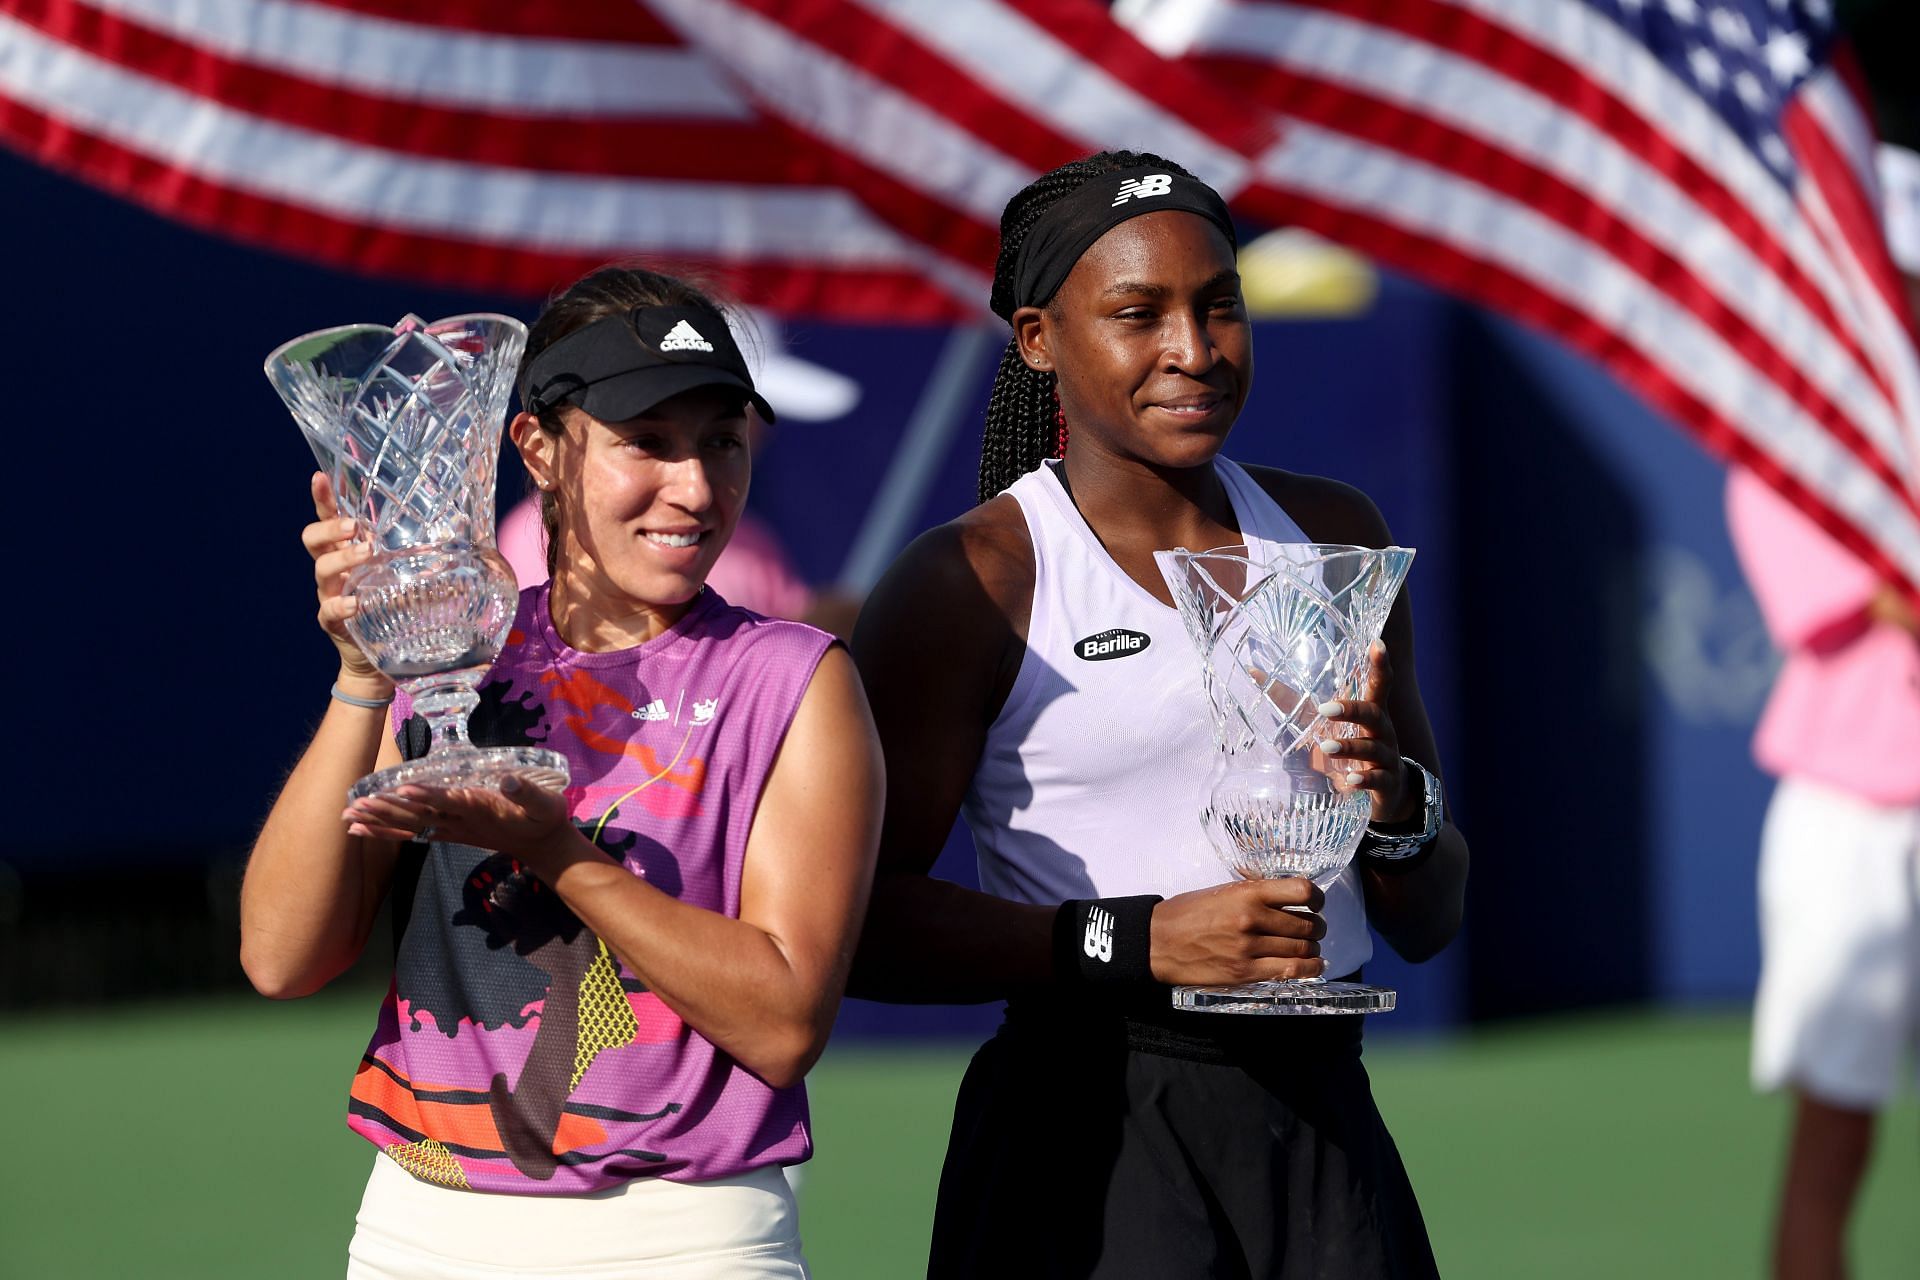 &lt;a href=&#039;https://www.sportskeeda.com/player/jessica-pegula&#039; target=&#039;_blank&#039; rel=&#039;noopener noreferrer&#039;&gt;Jessica Pegula&lt;/a&gt; and Coco Gauff won the San Diego Open women&#039;s doubles title.